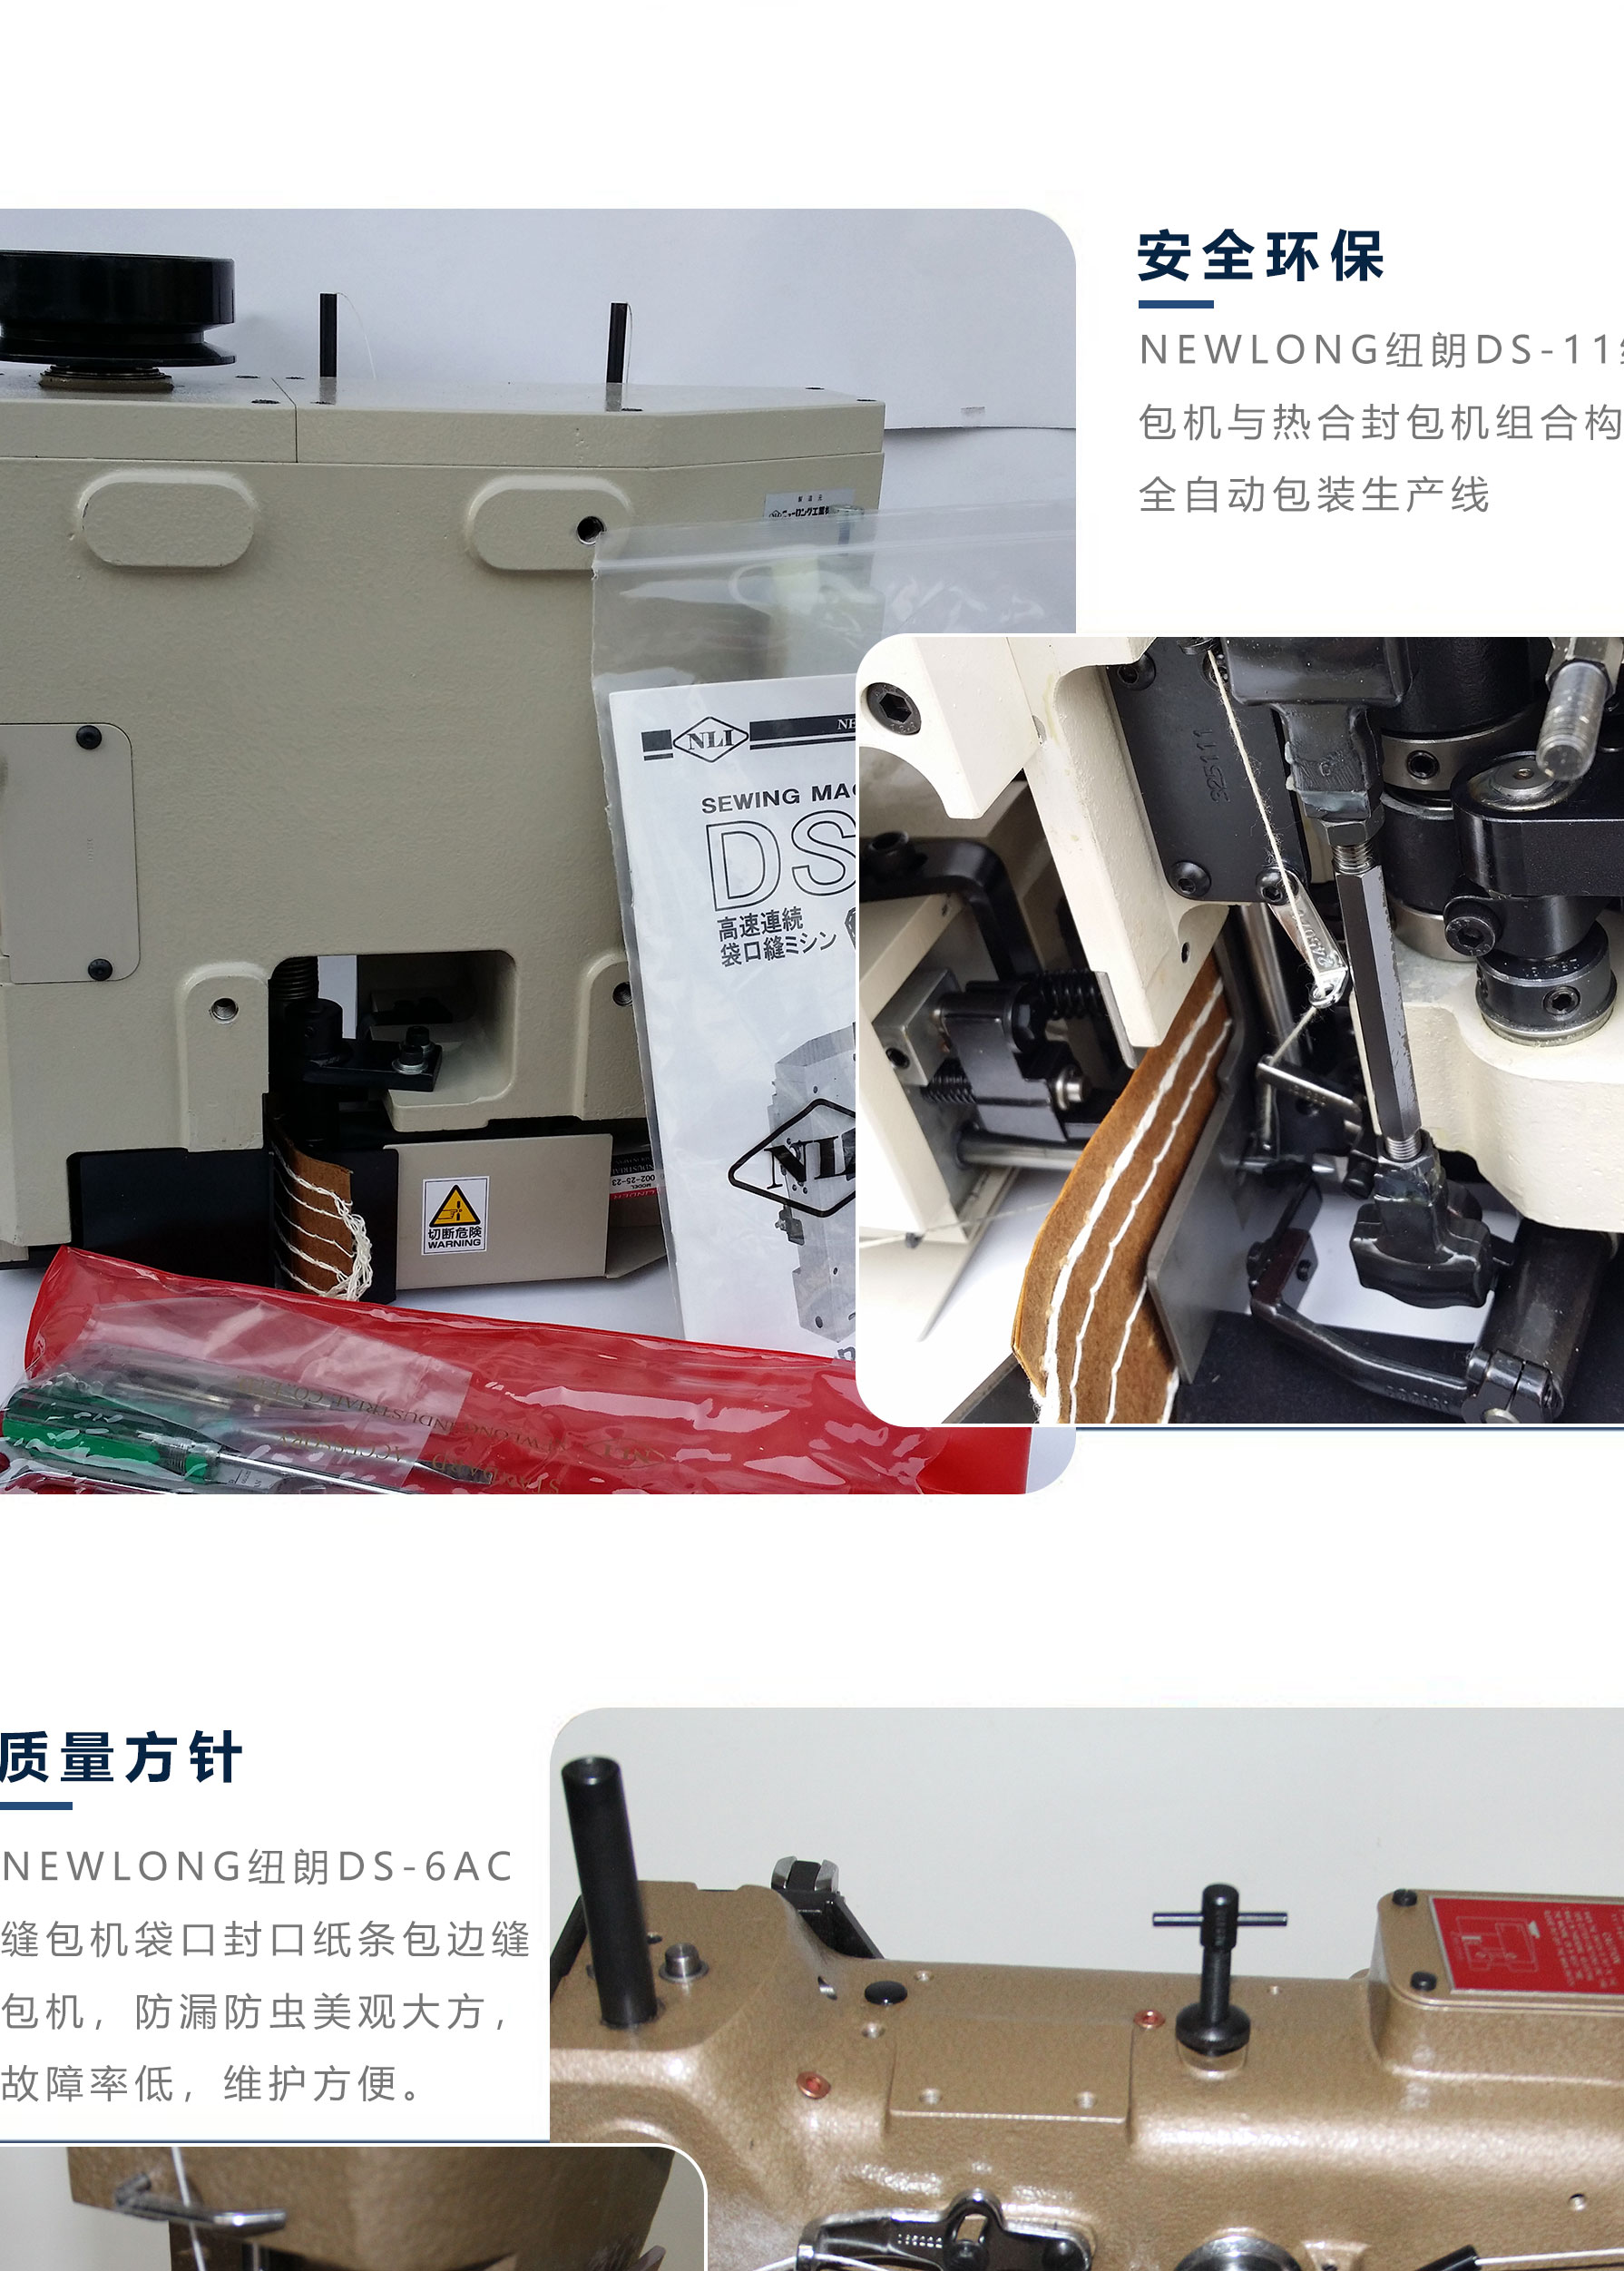 The difference between supplying NP-7A Newland portable sewing machine and Feiren brand f sealing machine